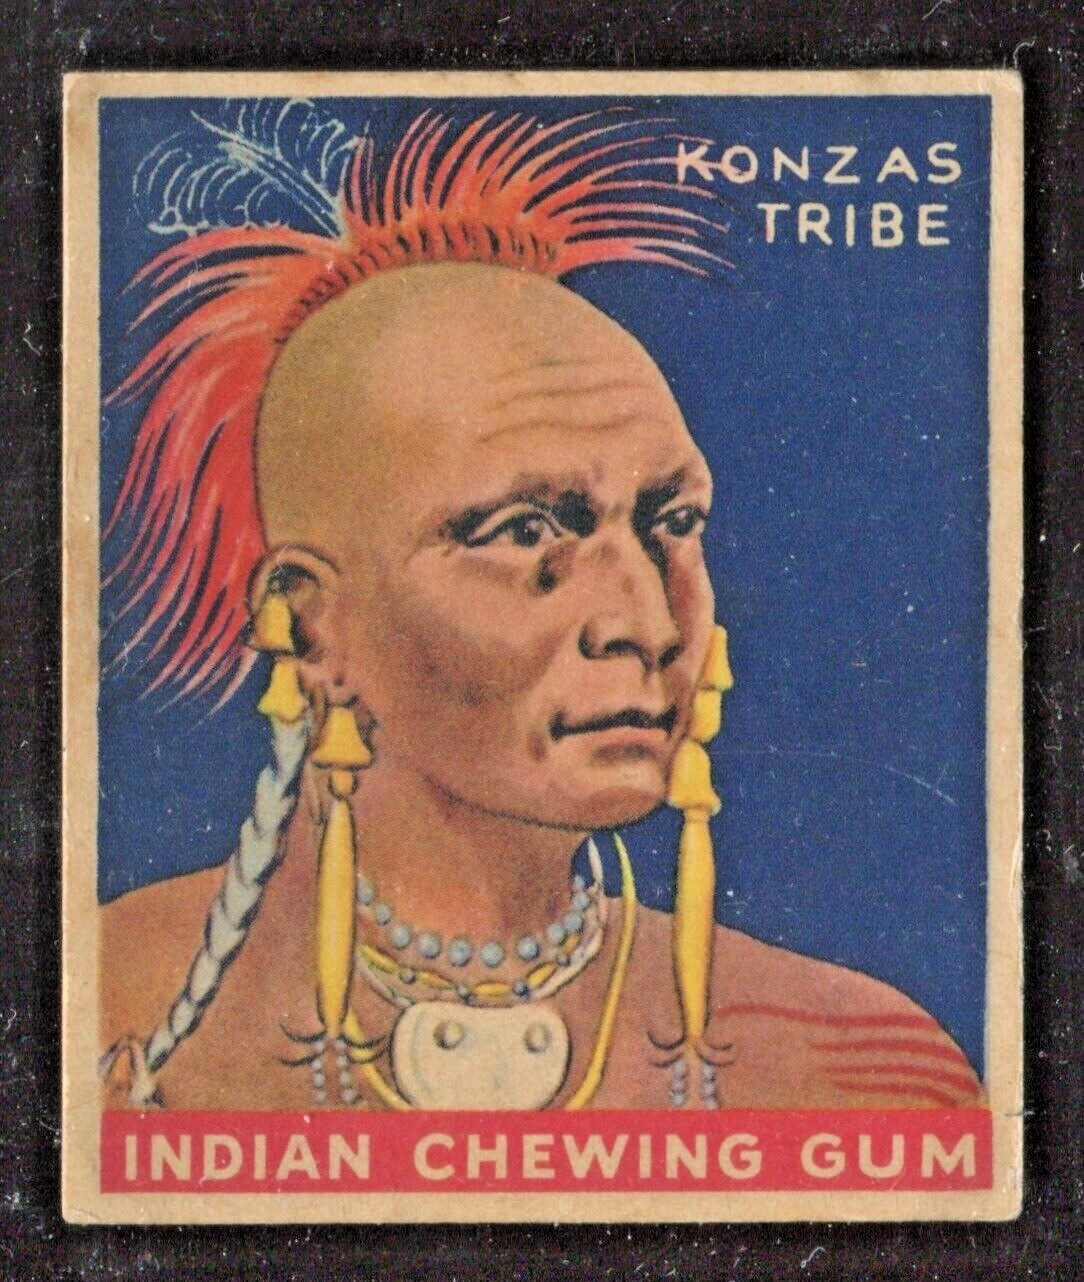 1933 Goudey Indian Gum #116 Series 288 Low Skip Chief Konzas Tribe NO Creases